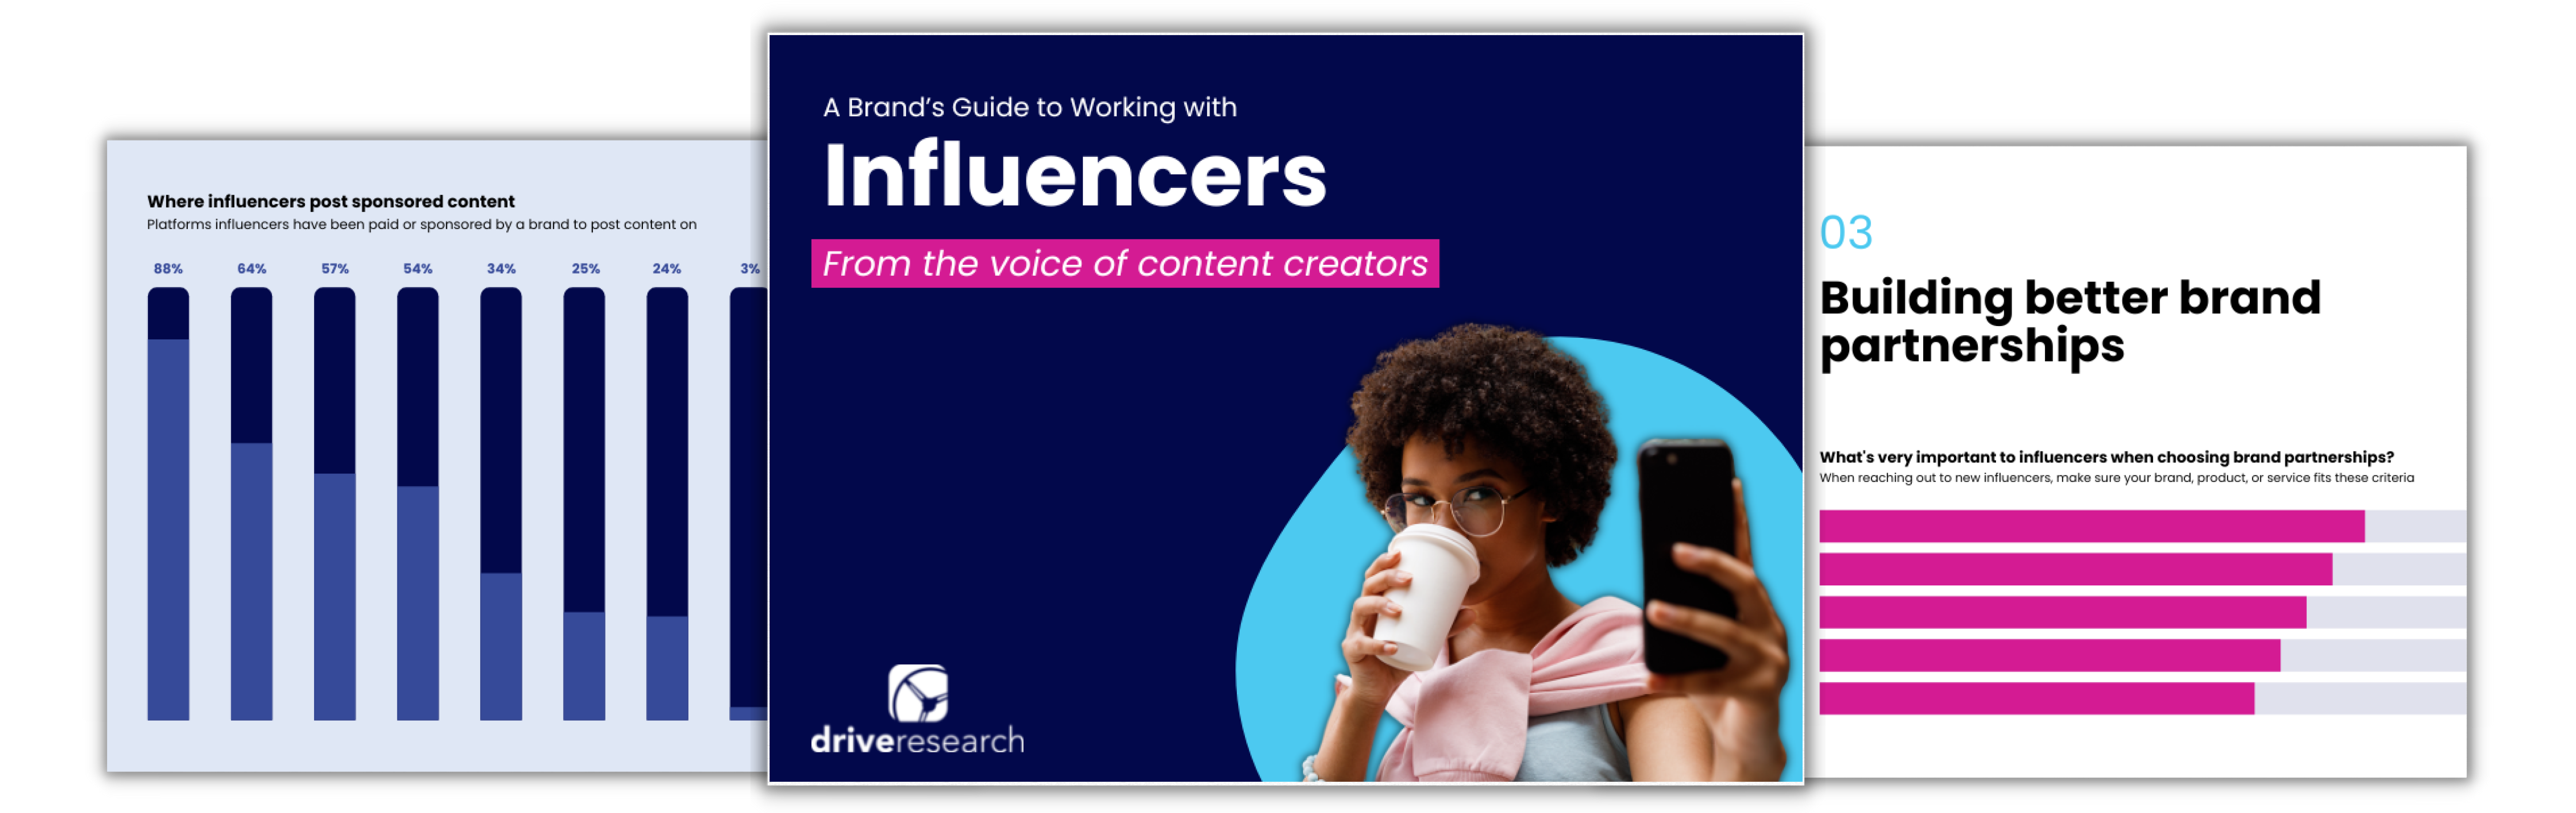 voice of influencer report snapshot - syndicated panel data example